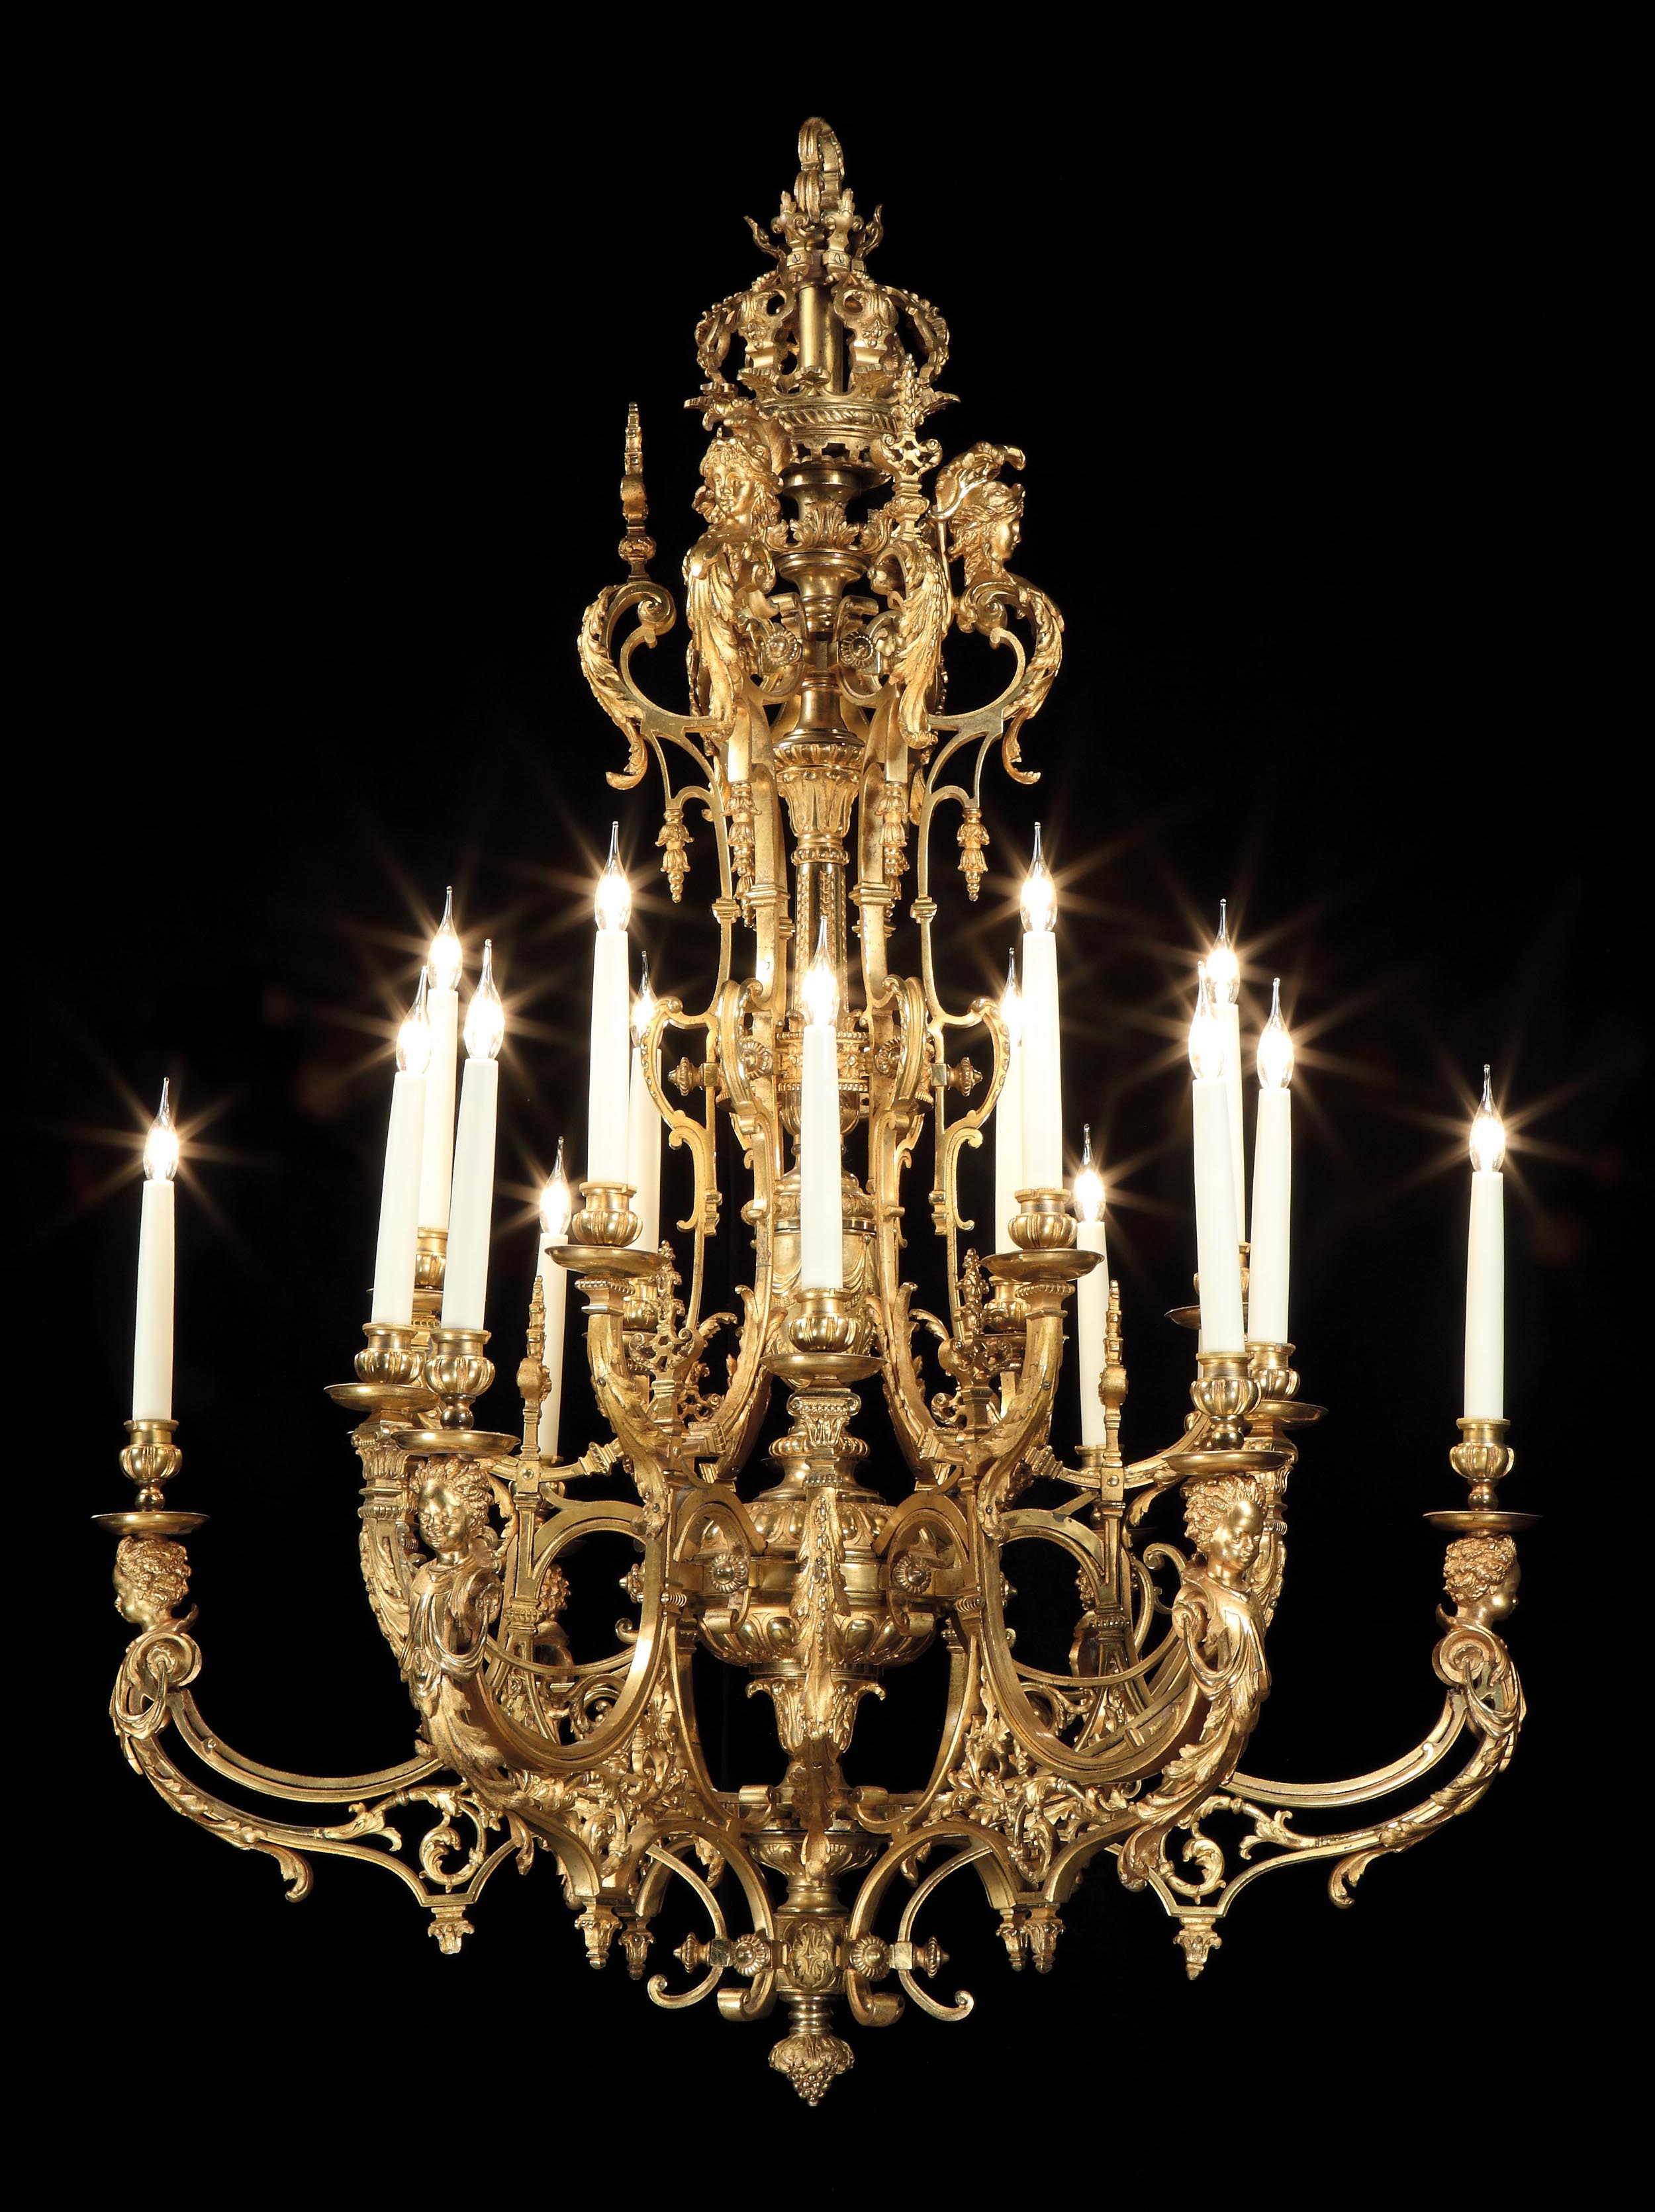 A Large French Eighteen Light Chandelier In the Louis XVIth Manner 